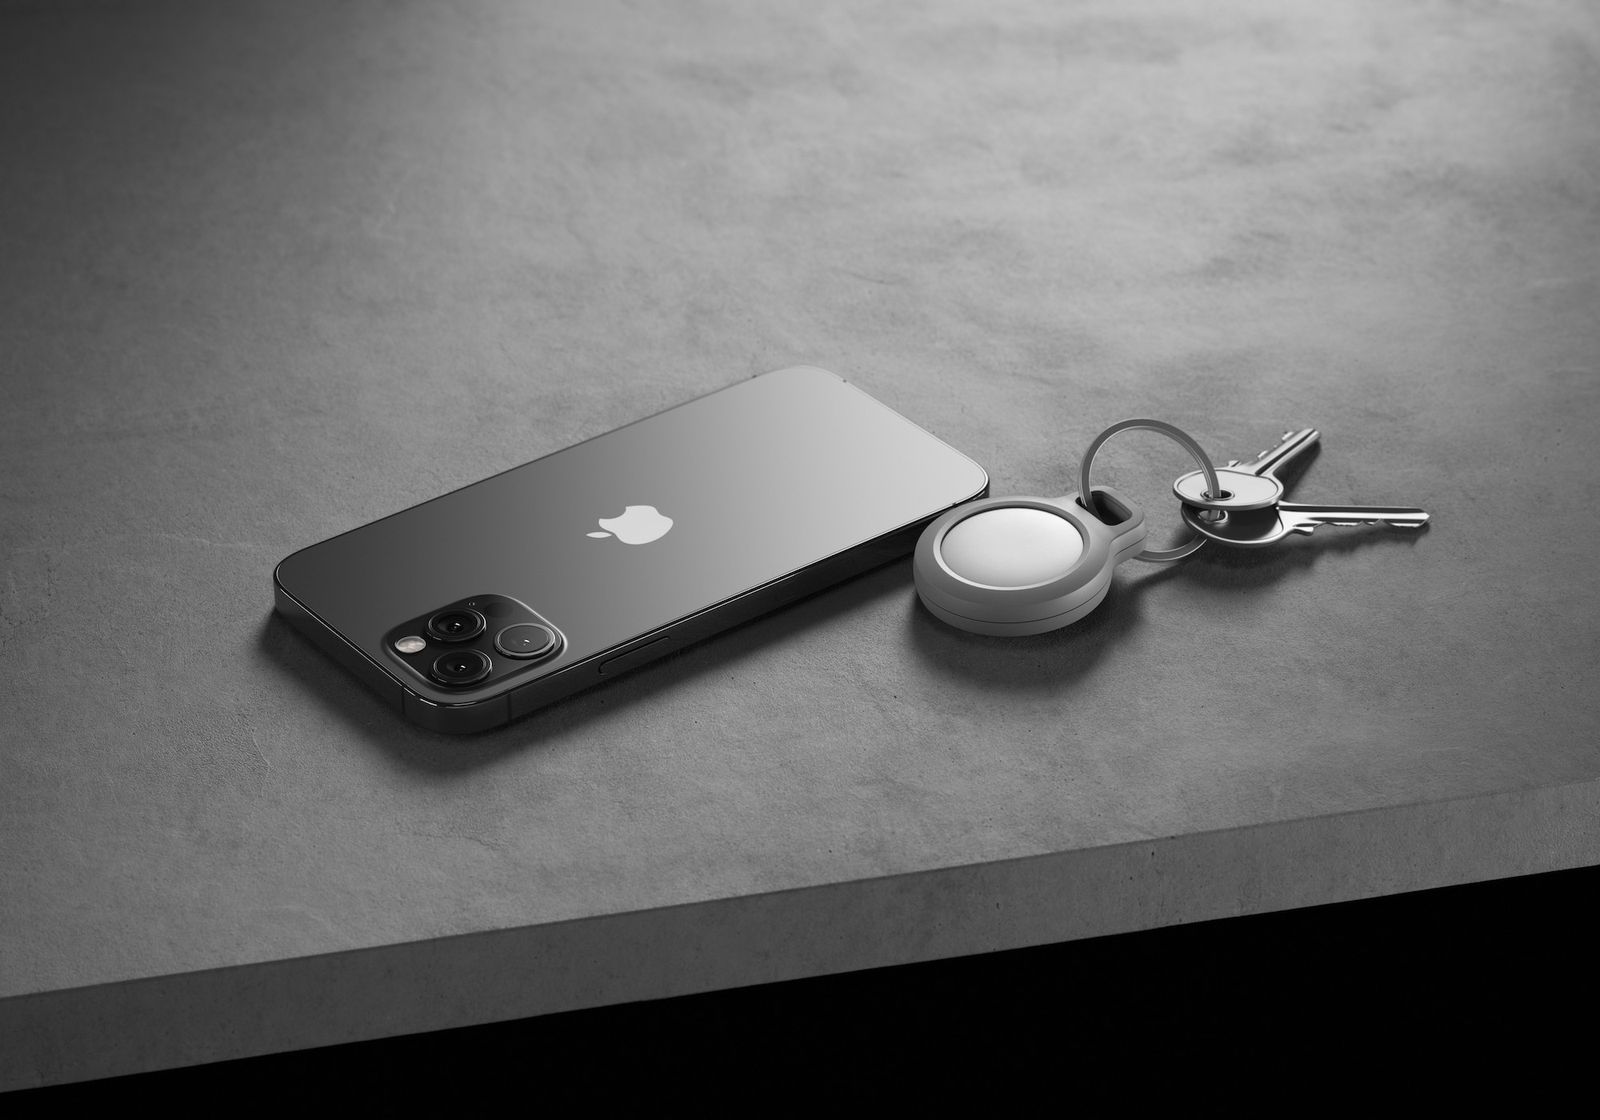 Nomad Announces 'Rugged Keychain' for AirTag, Includes Add-On Engraving  Option for Pet ID Tags - MacRumors